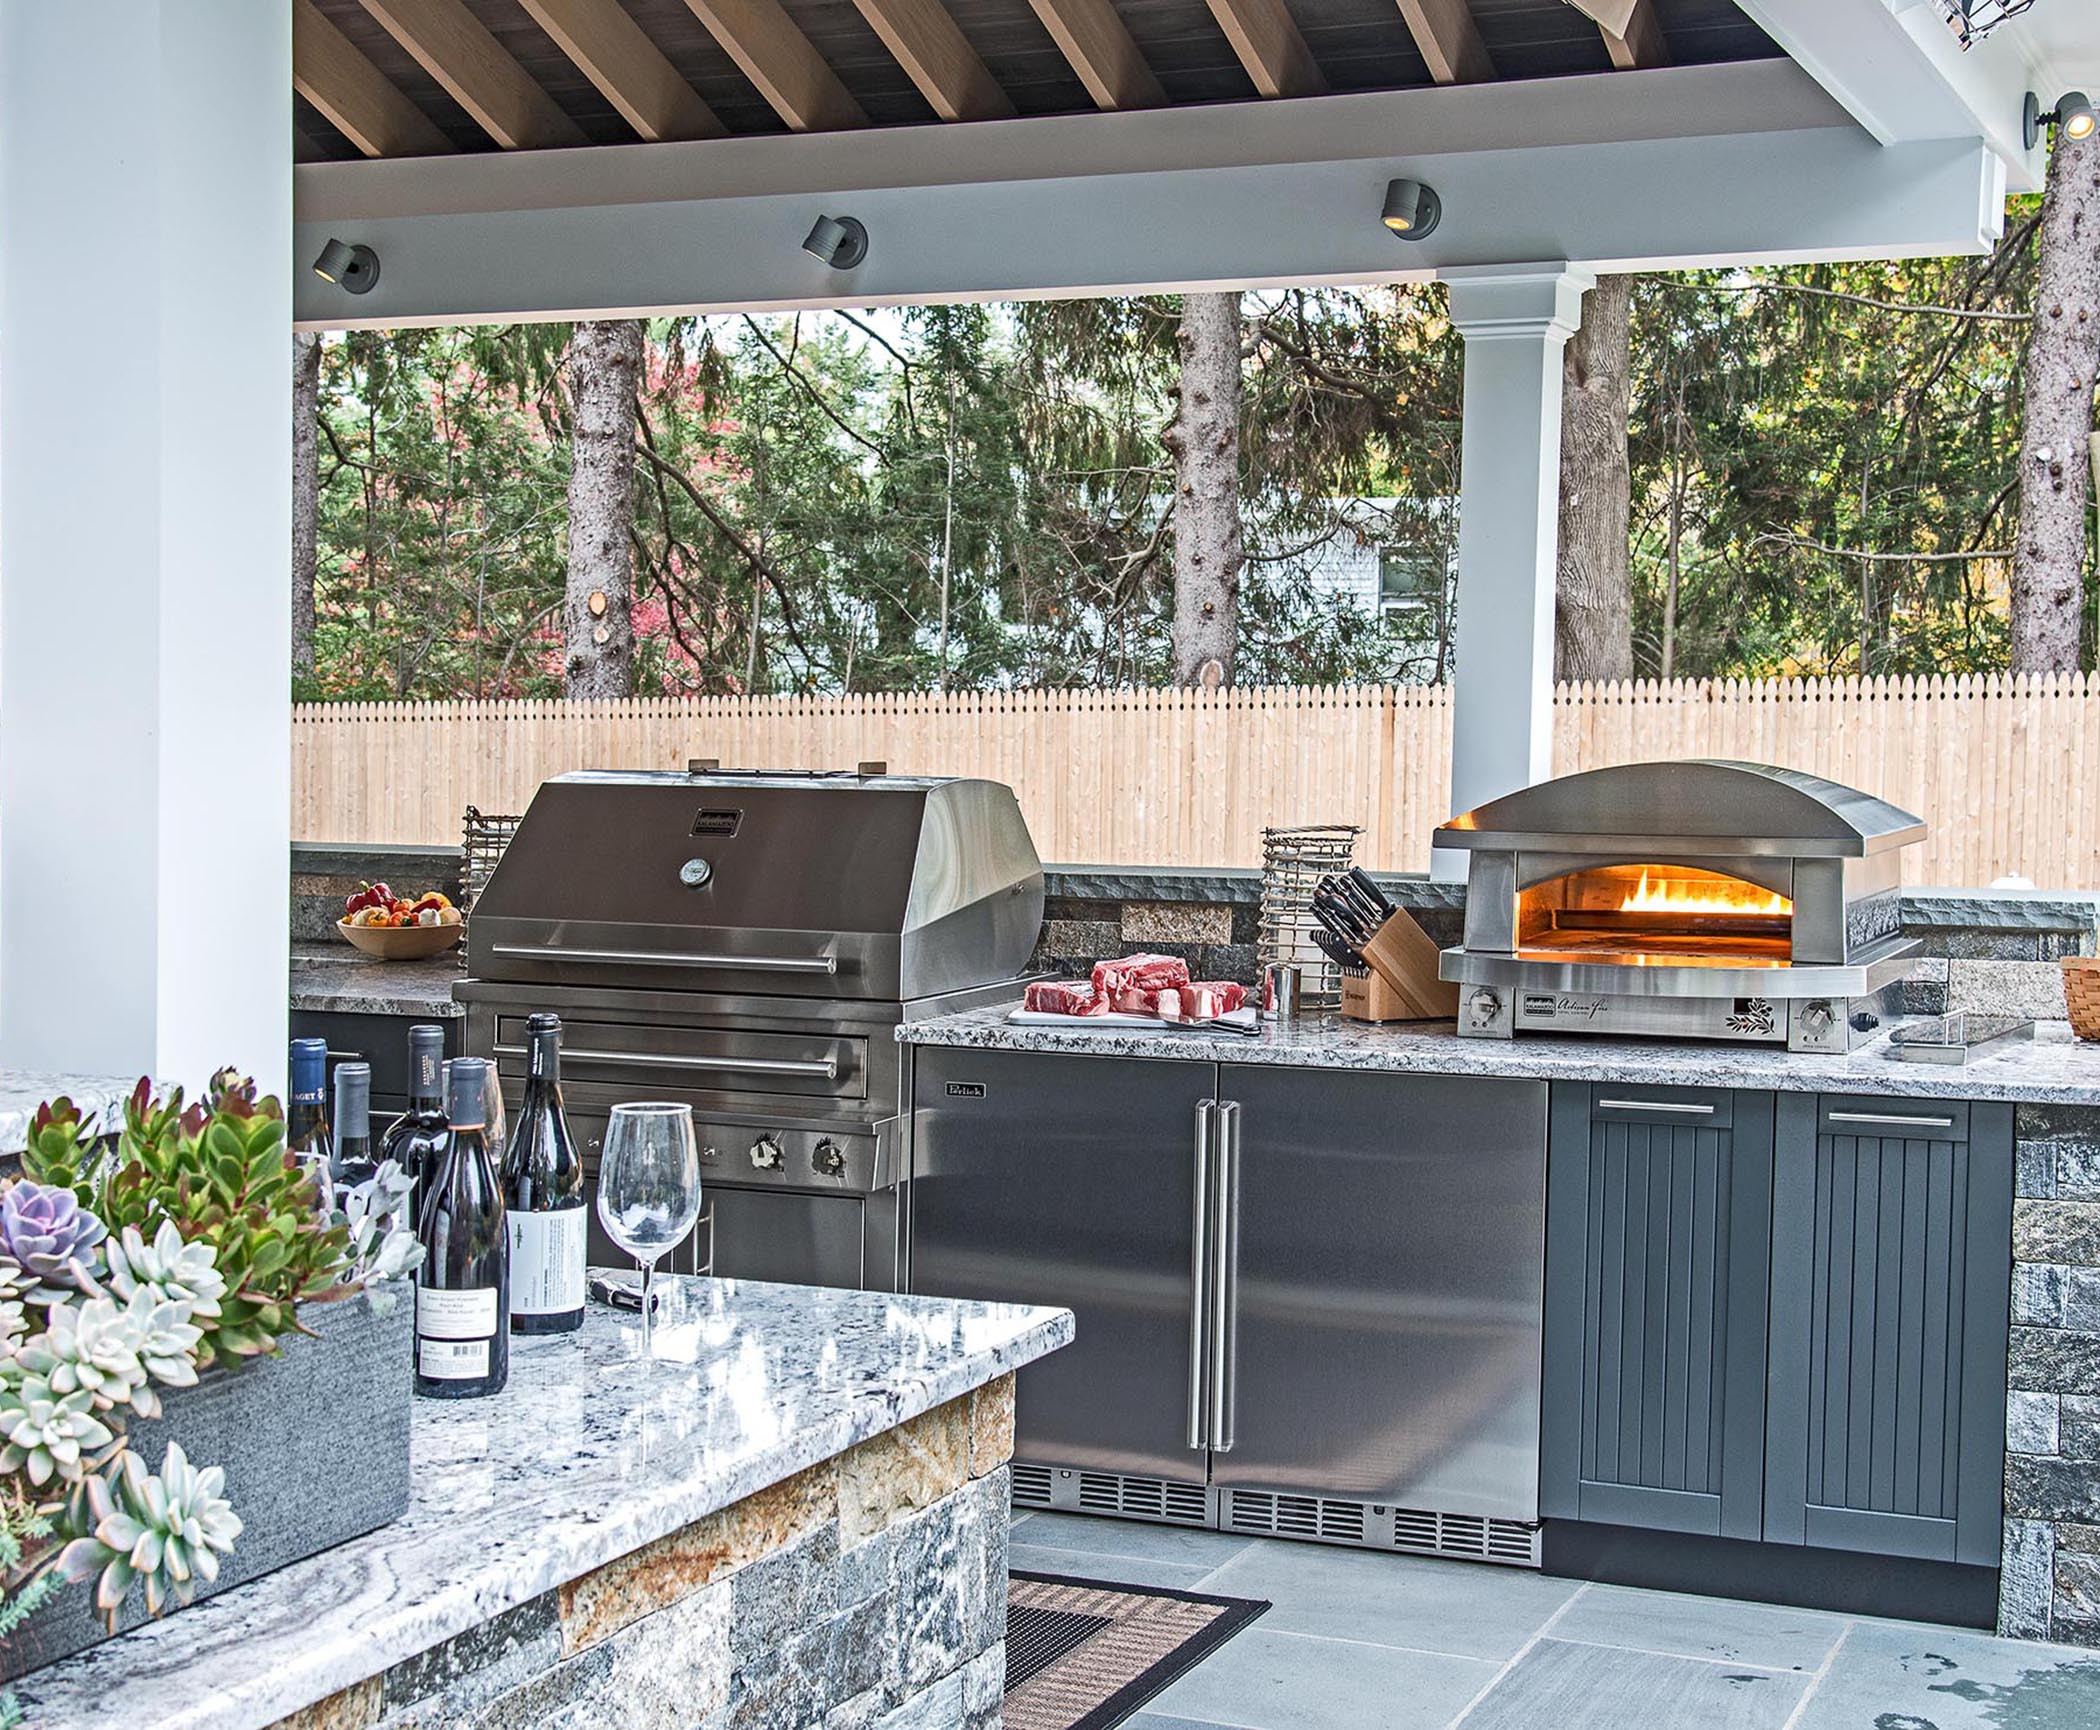 Outdoor Kitchen And Patio
 Outdoor Kitchen for Your Patio Design Build Planners